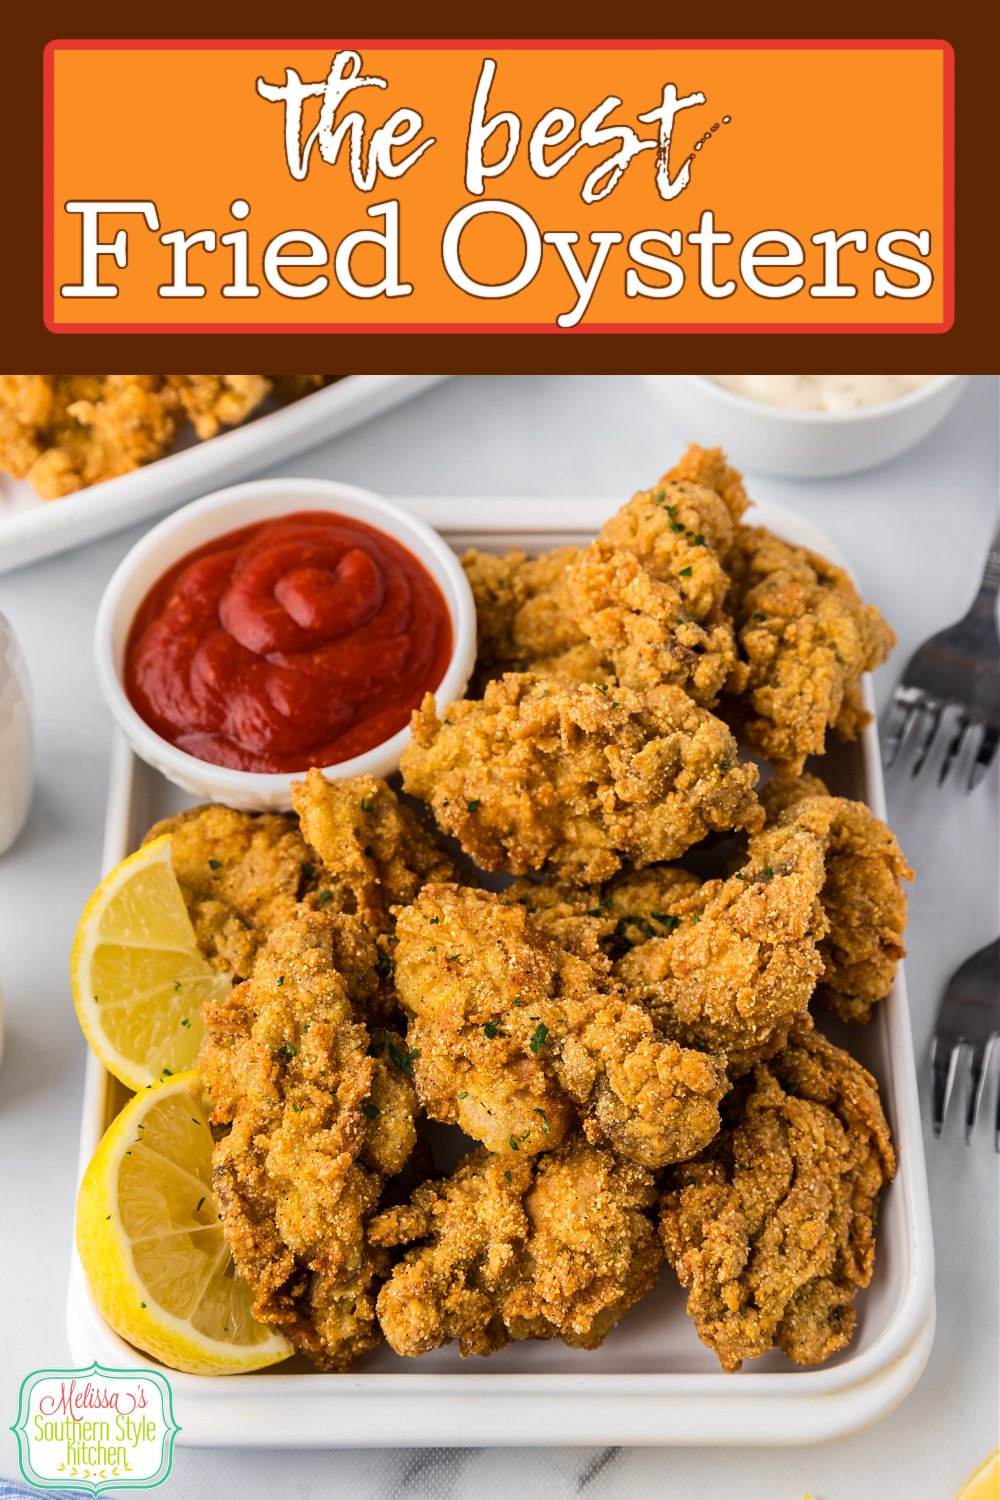 These Fried Oysters are tender on the inside with a crispy golden exterior. Serve them as an appetizer or an entree with you favorite sauces. #southernseafoodrecipes #southernfood #friedoysters #easyoysterrecipes #oysters #easyfriedoysters #seafoodrecipes via @melissasssk